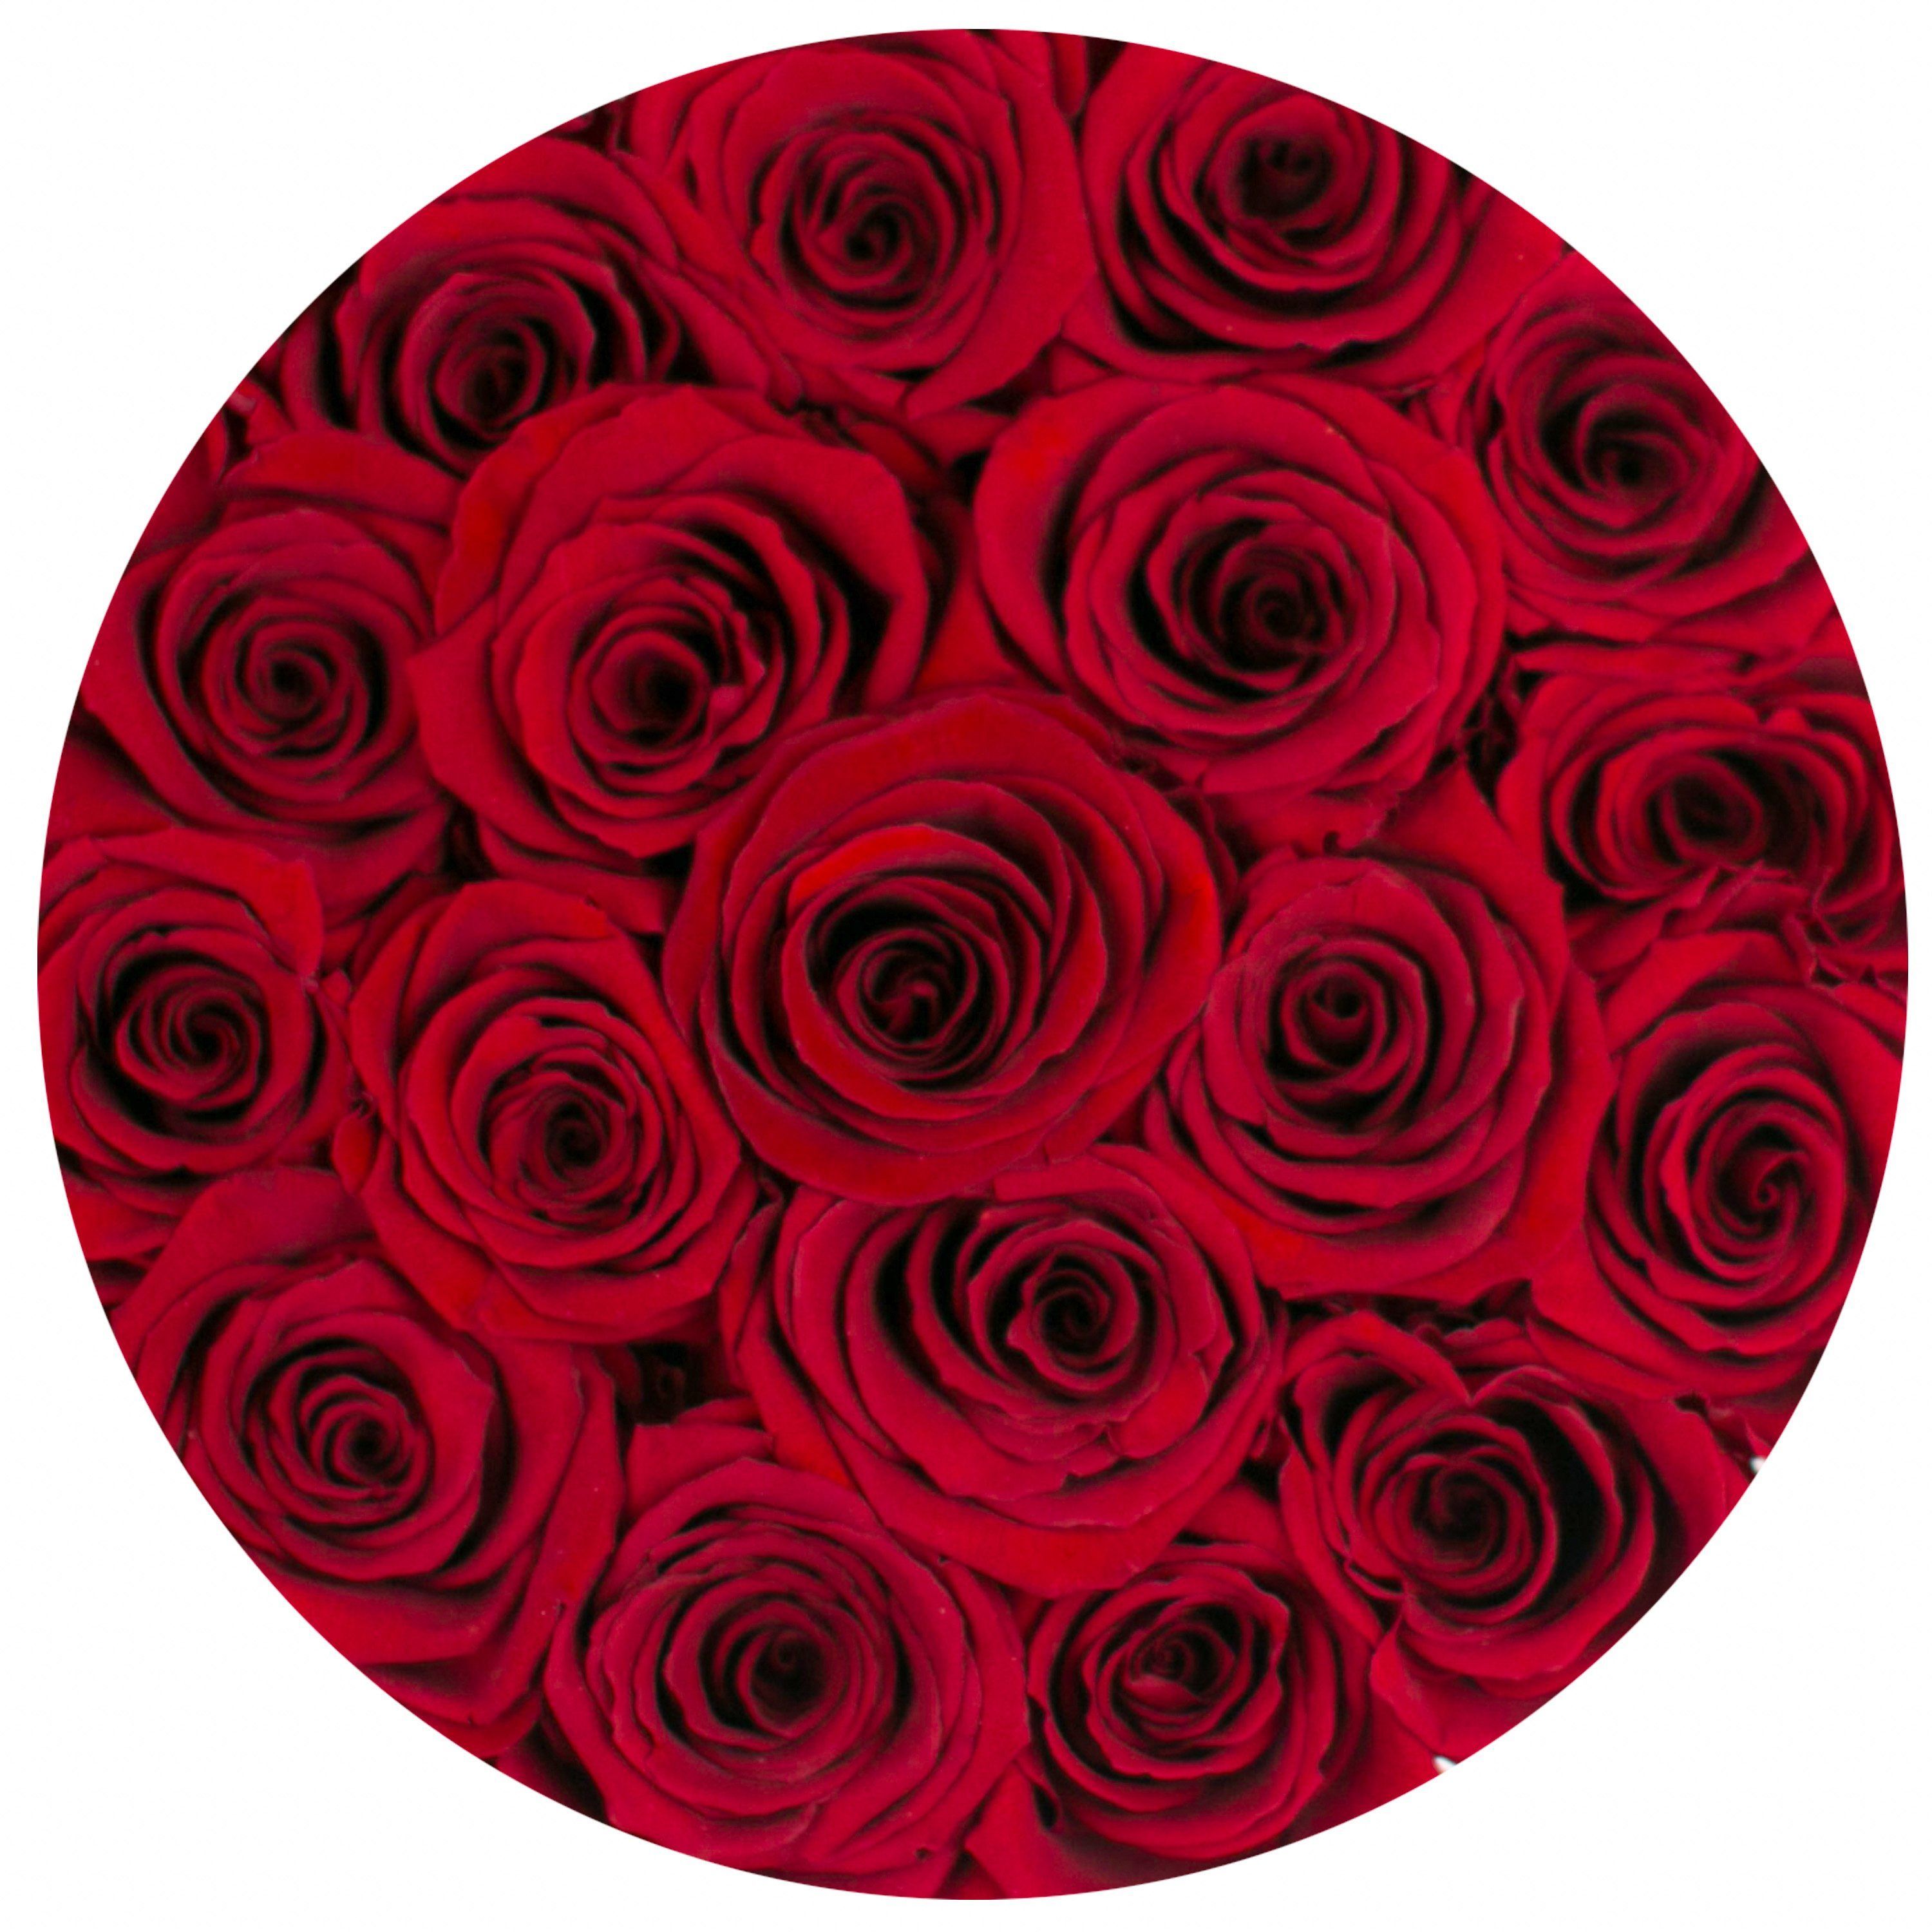 classic round box - "LOVE" - red roses red eternity roses - the million roses